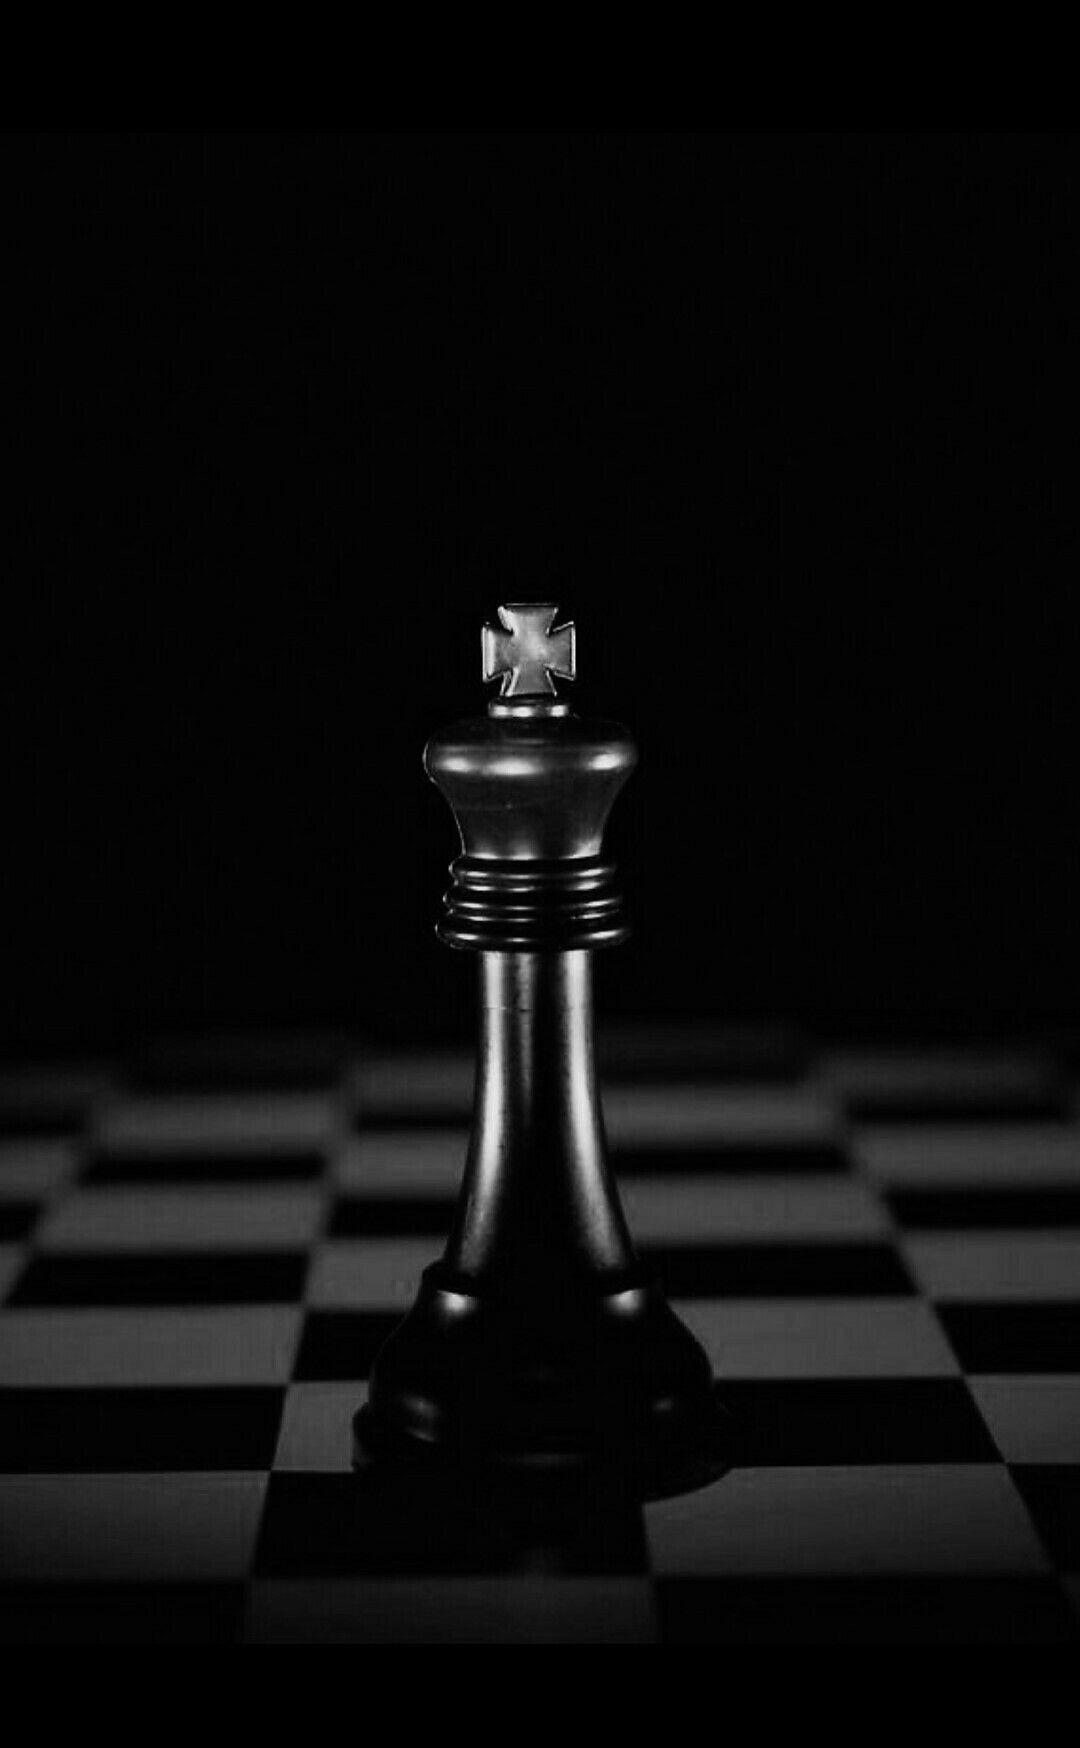 Chess King iPhone Wallpaper 4K » iPhone Wallpapers